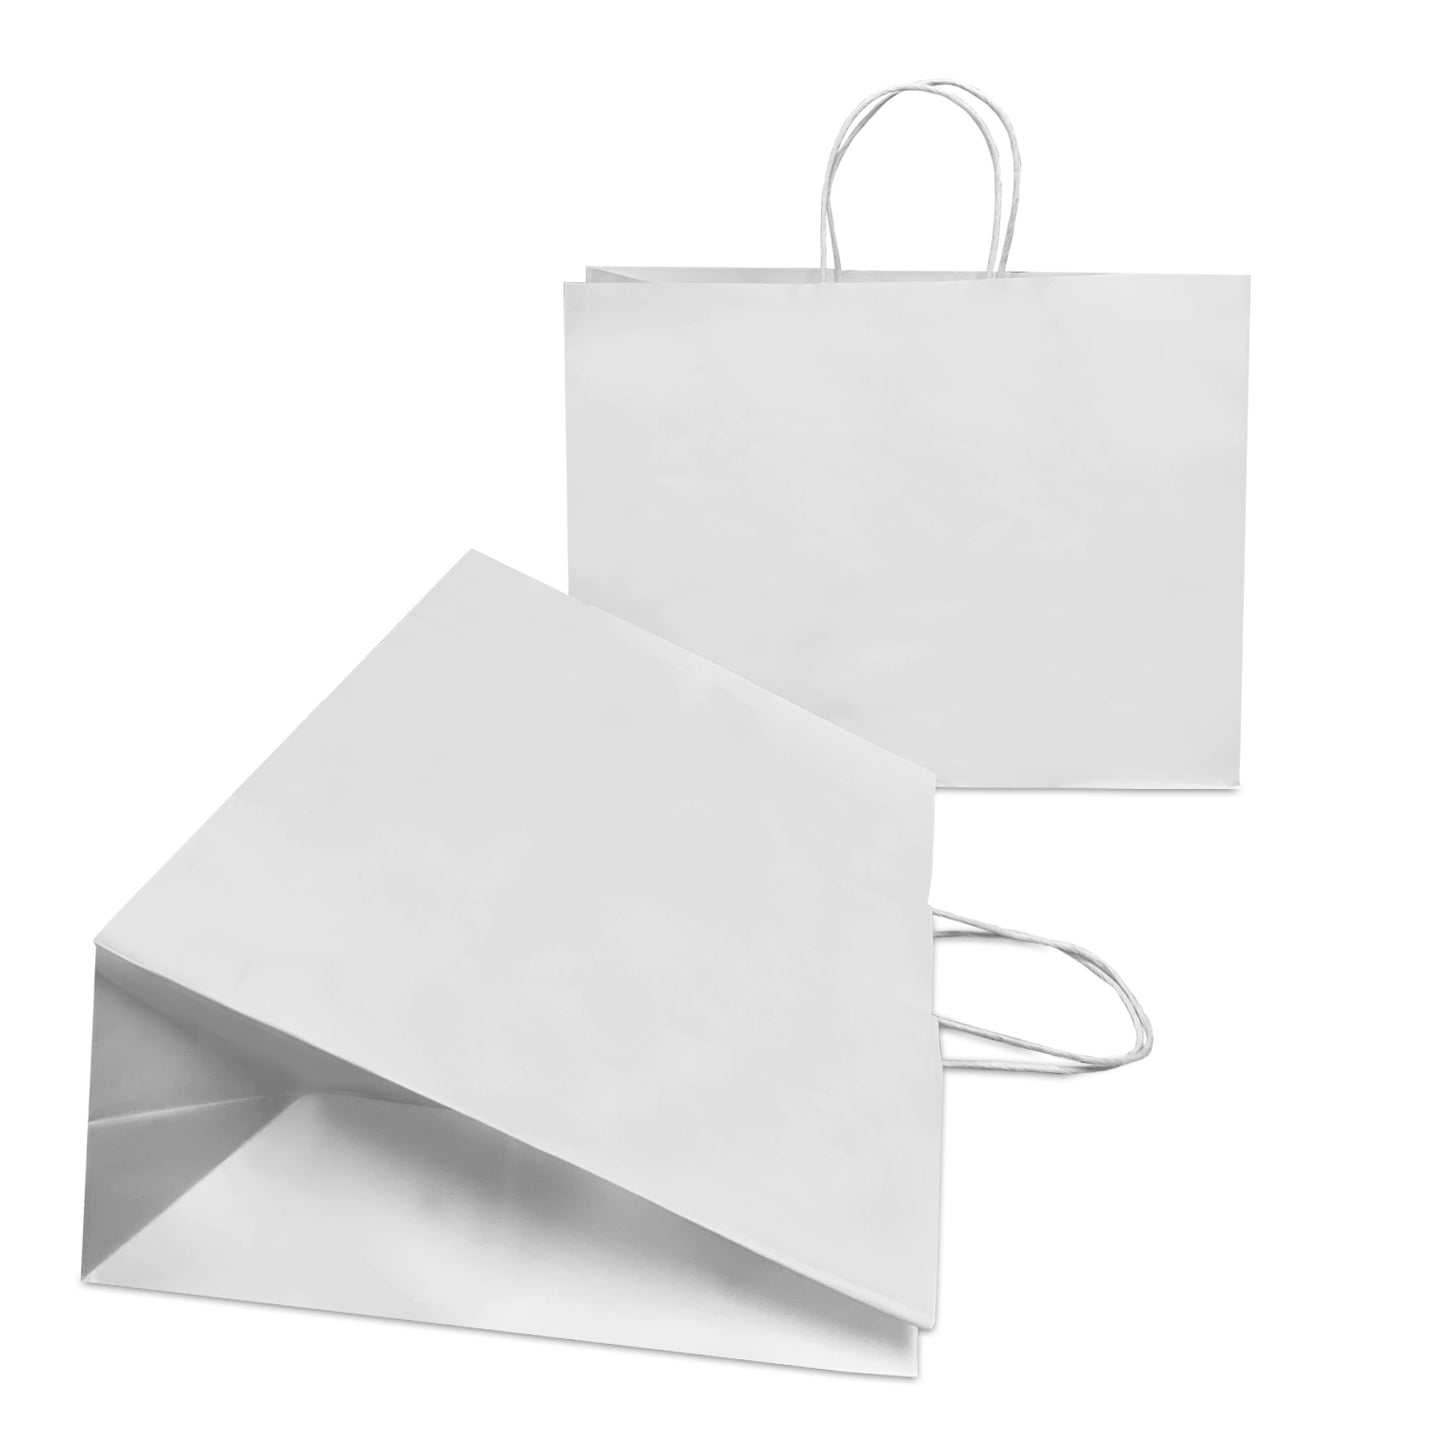 250 Pcs, Vogue,  16x6x12 inches, White Kraft Paper Bags, with Twisted handle